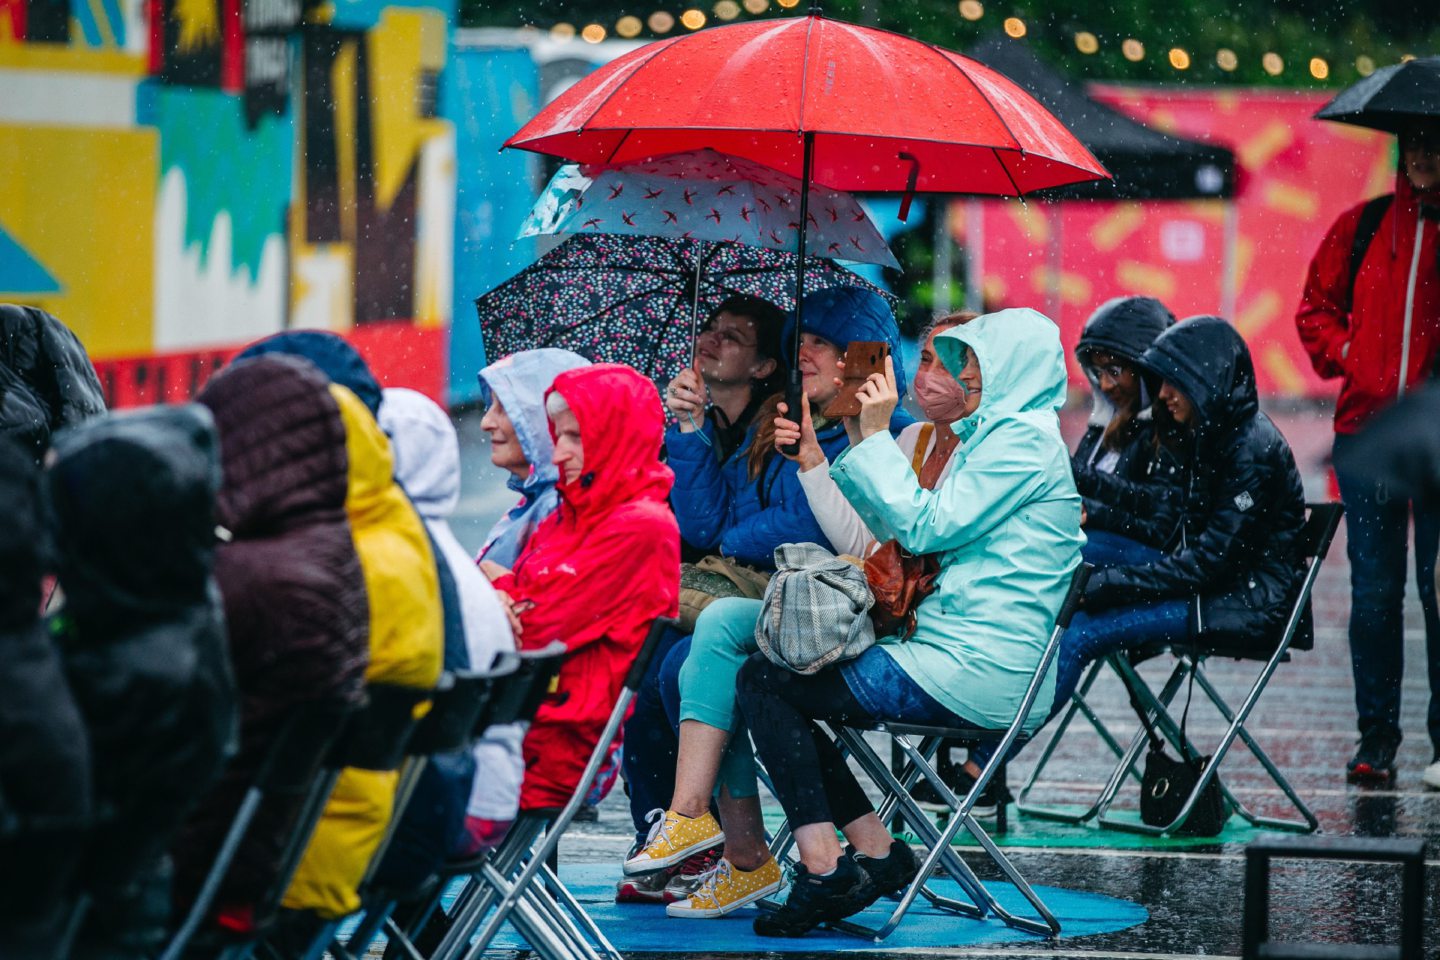 Spectators watching the show in the heavy rain at Multi Story, Castle Terrace